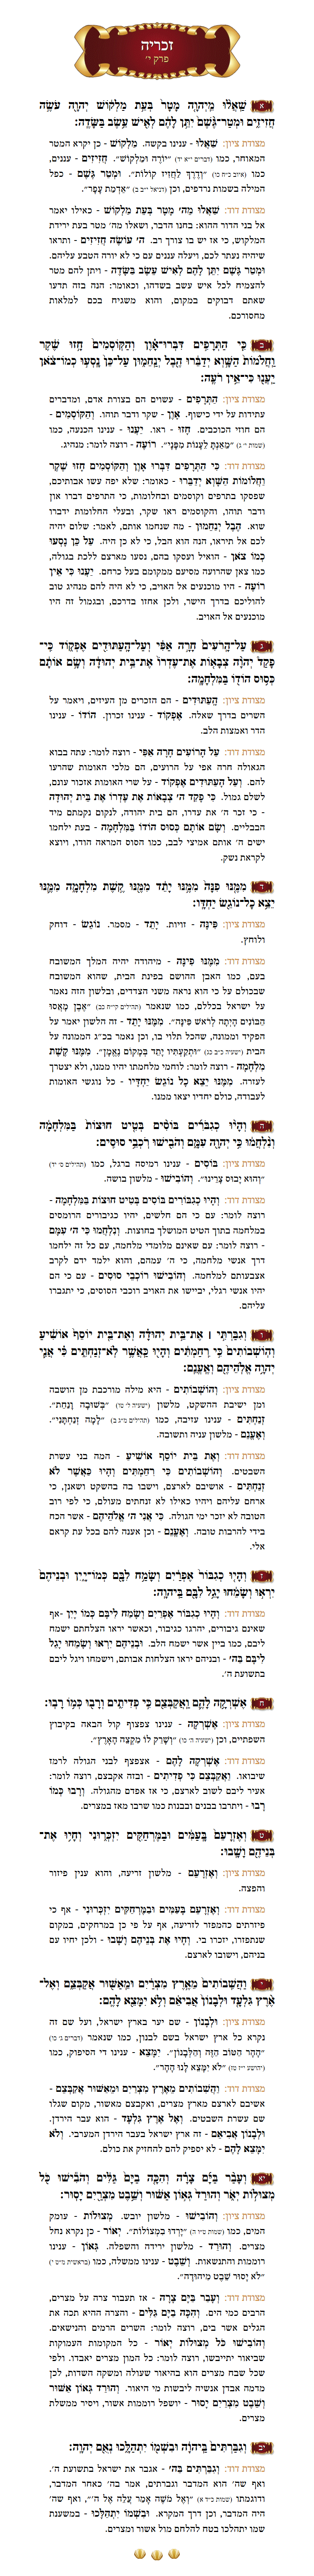 Sefer Zechariah Chapter 10 with commentary